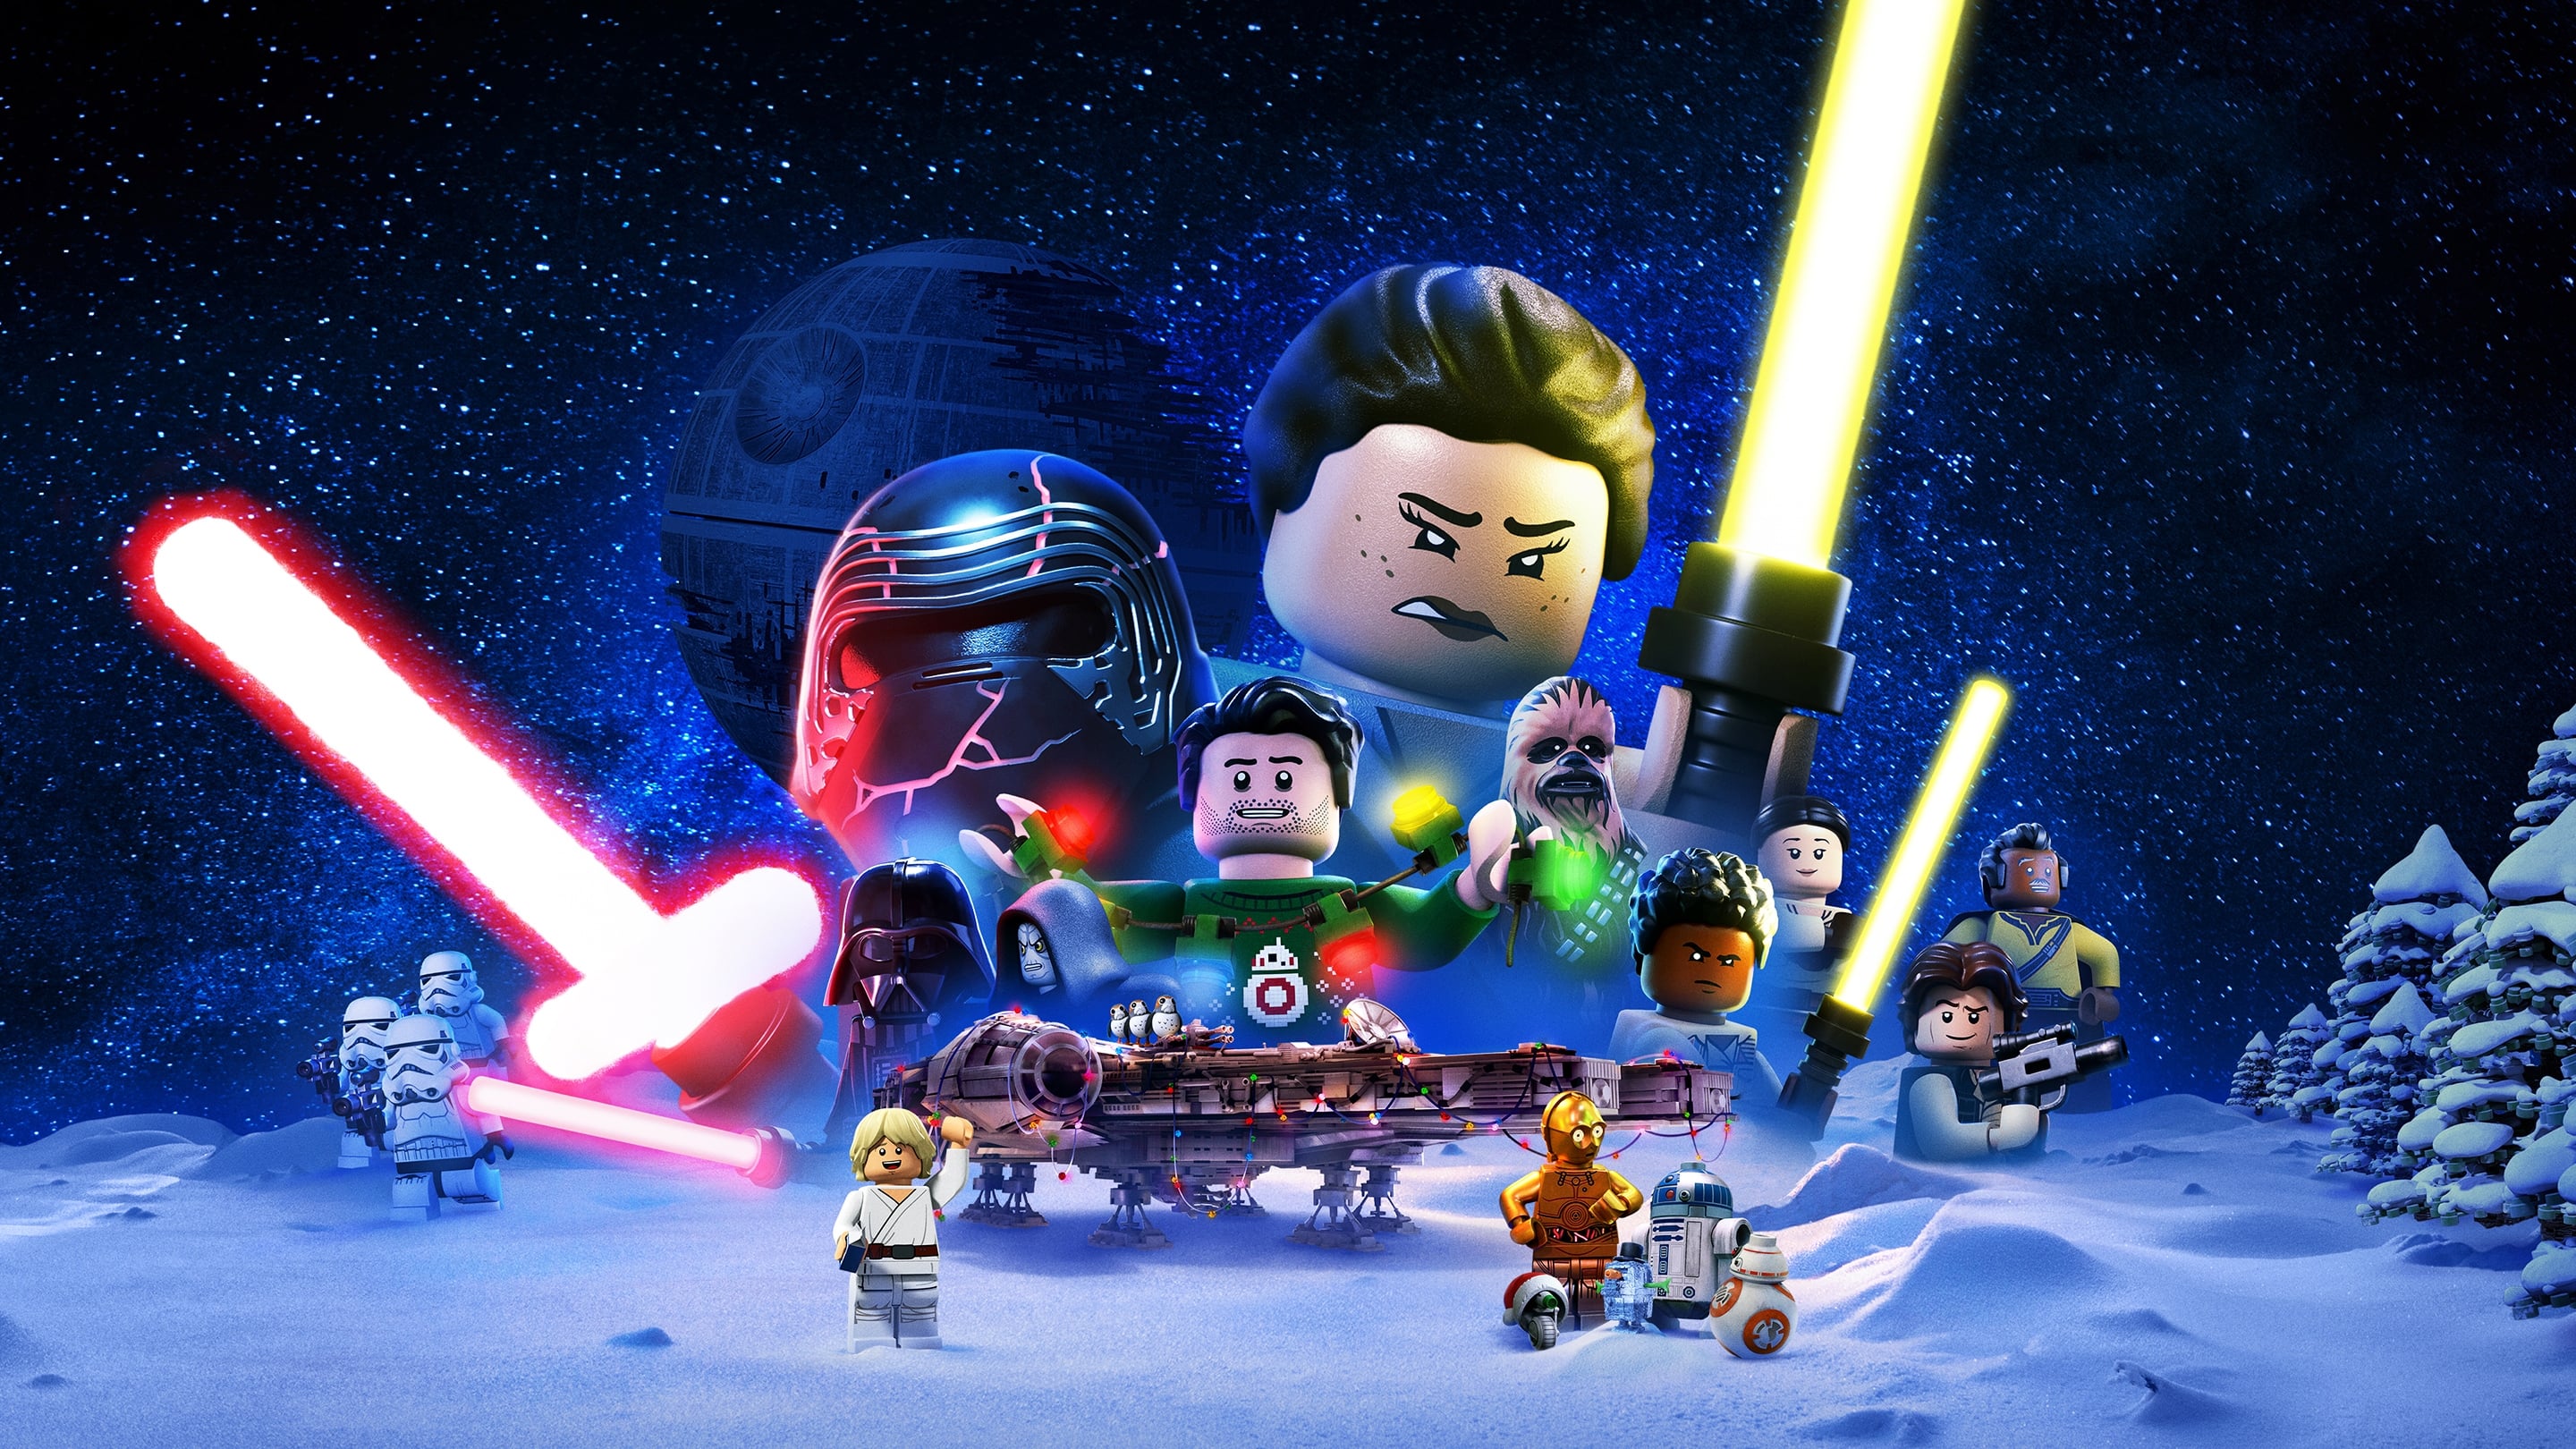 The Lego Star Wars Holiday Special (2020) 4K Movie Online Full